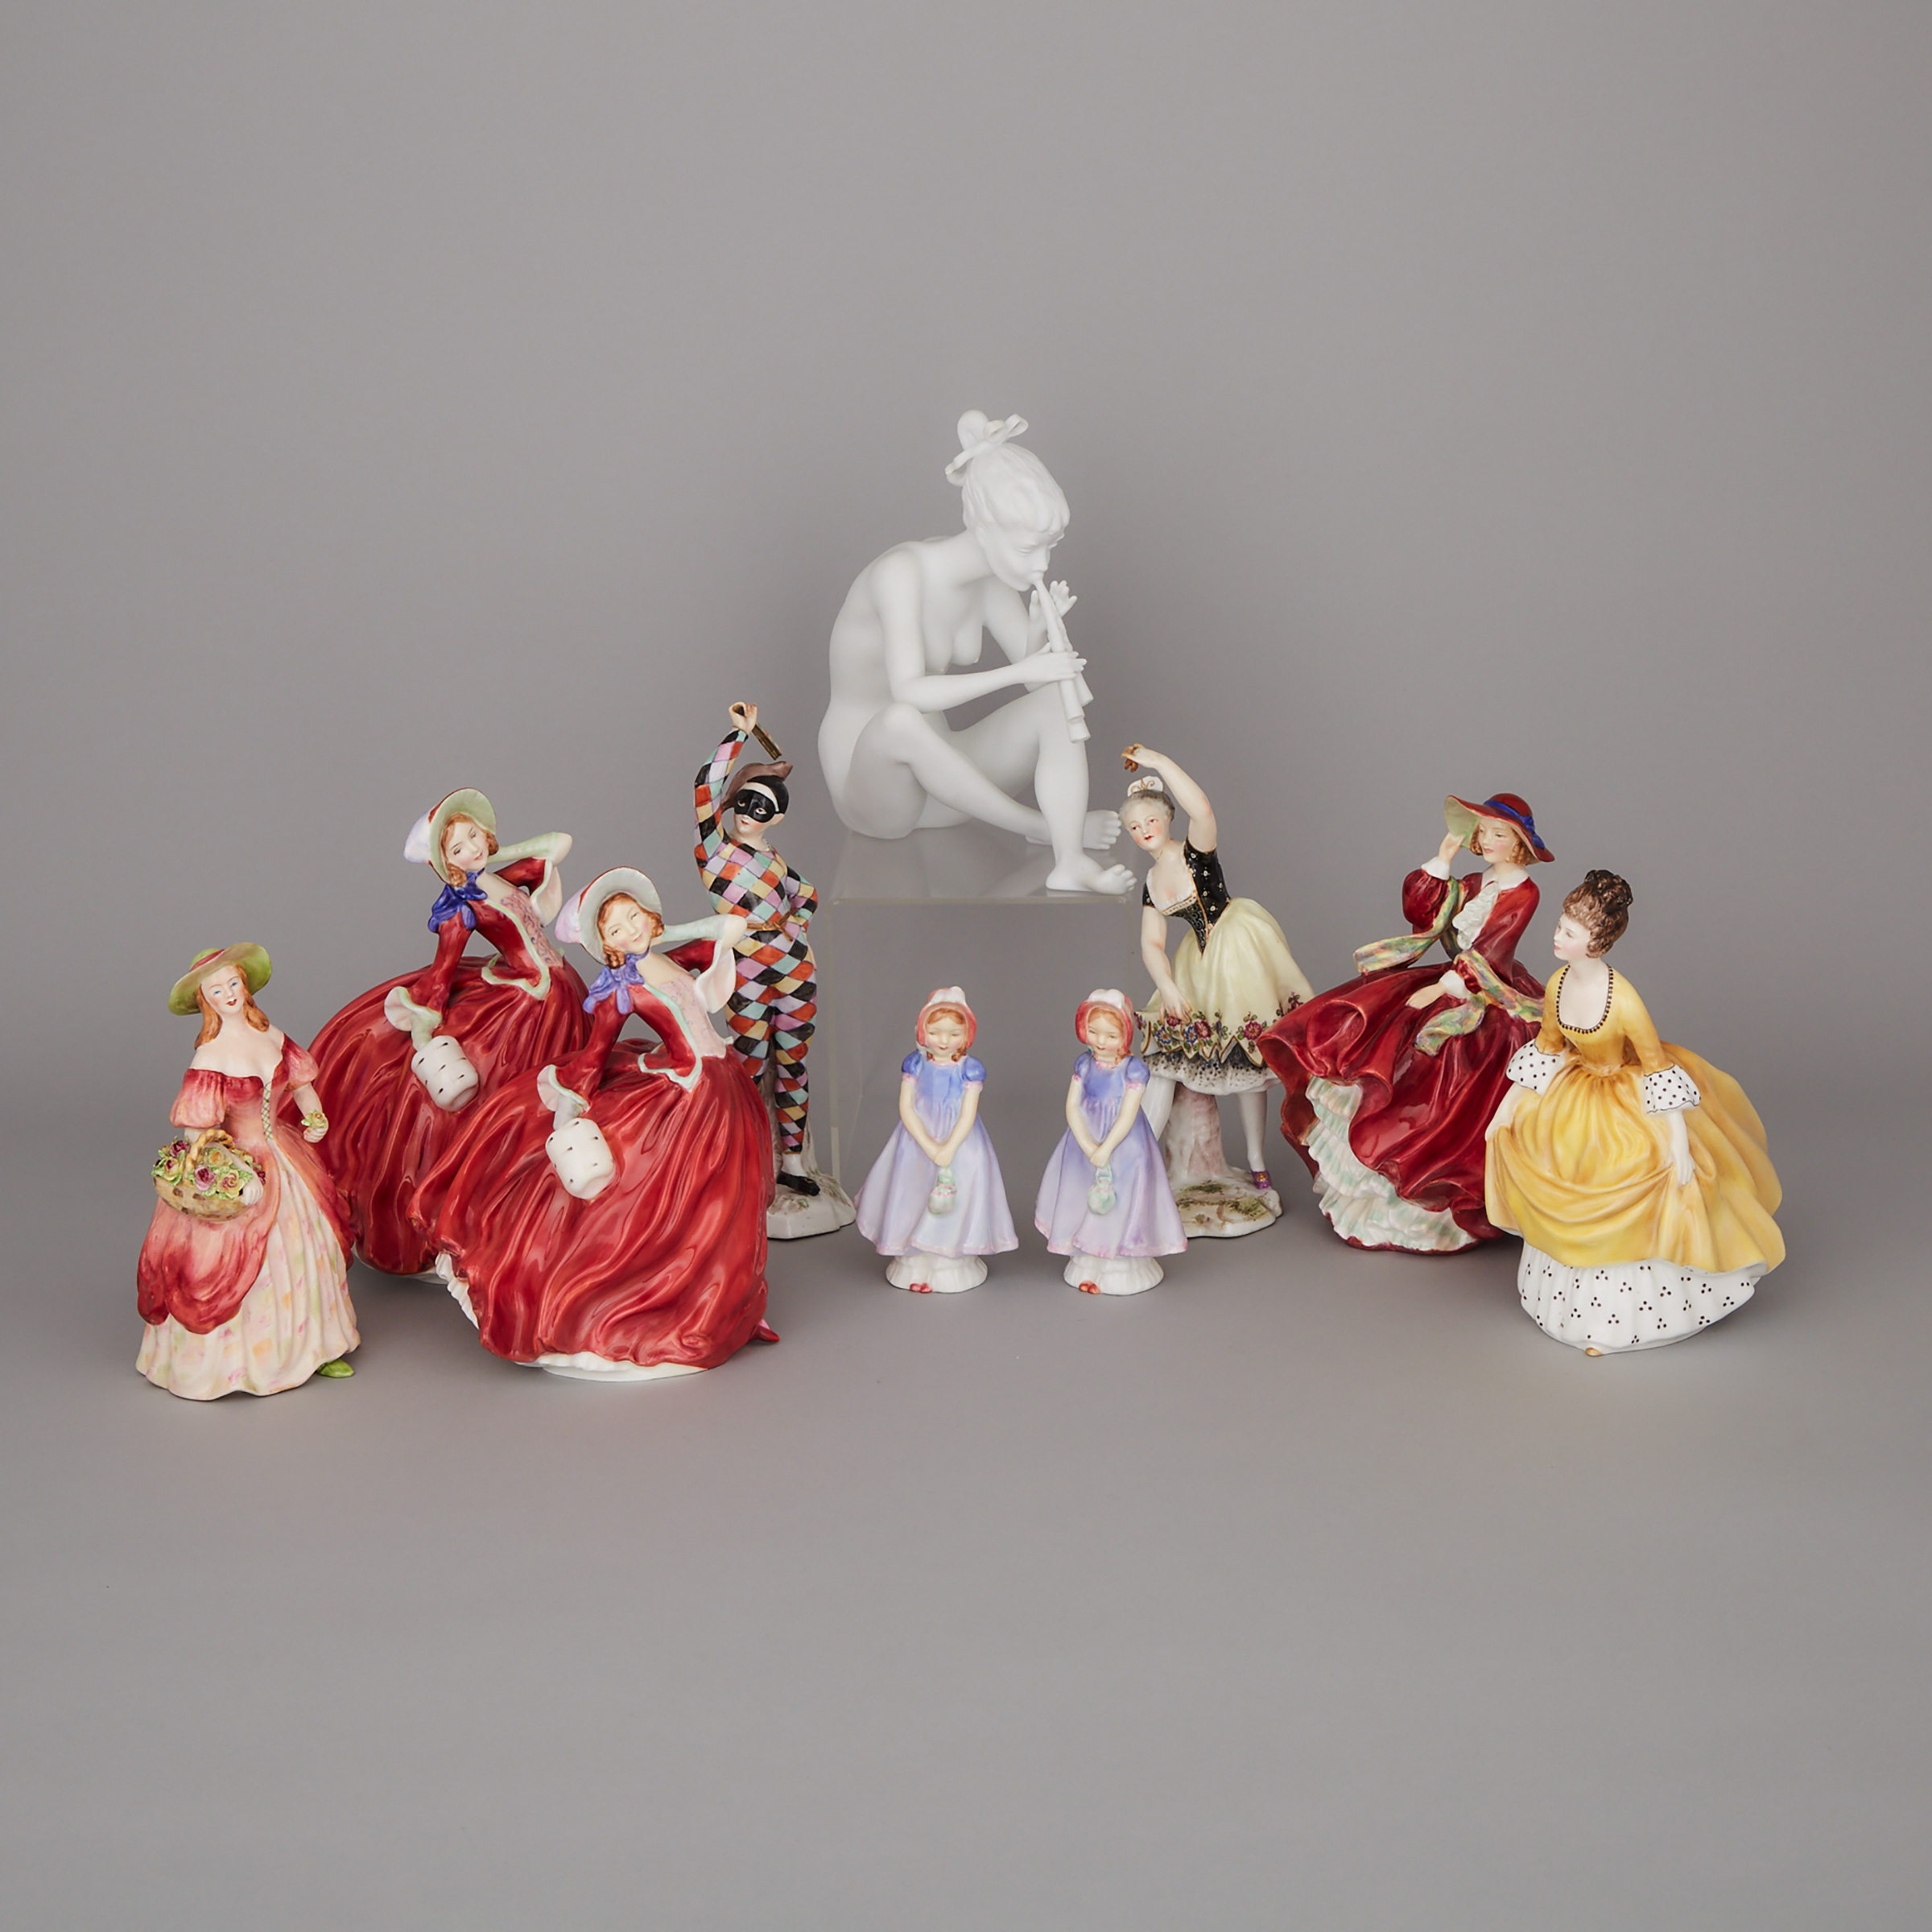 Ten Royal Doulton, Adderley, and Continental Porcelain Figures, 20th century